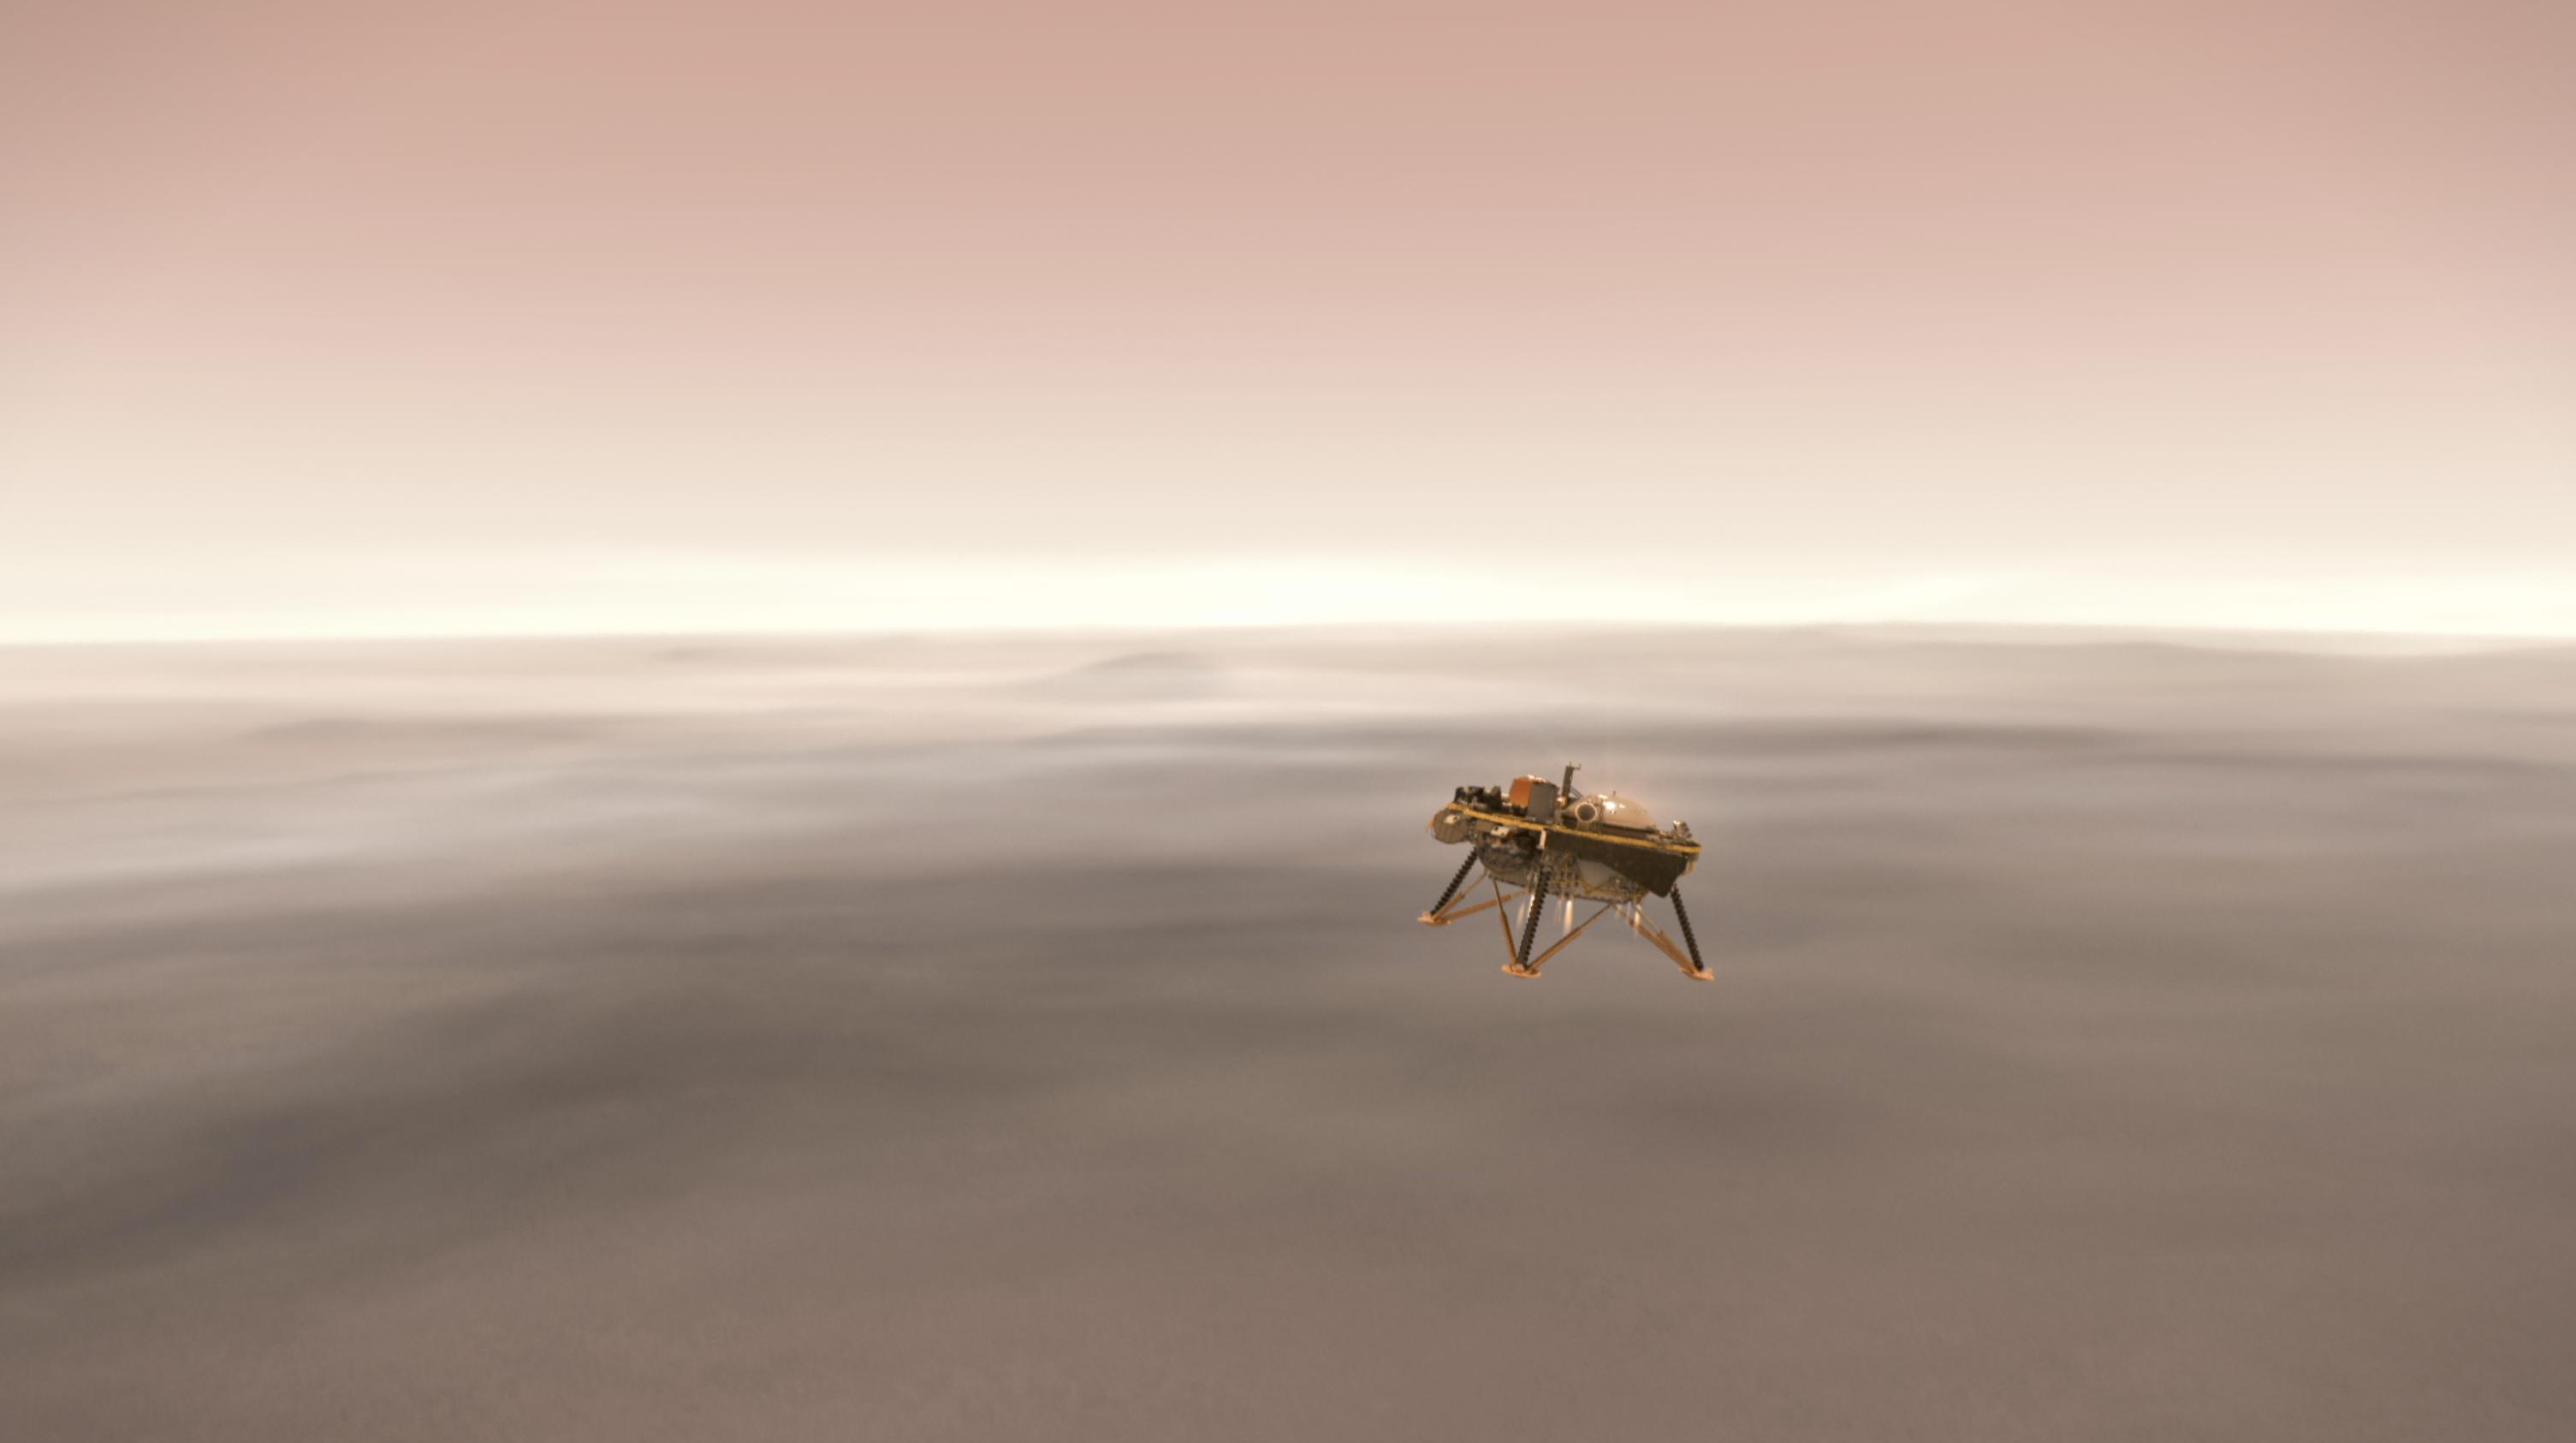 PIA22810: InSight Heading Down to the Martian Surface (Illustration)